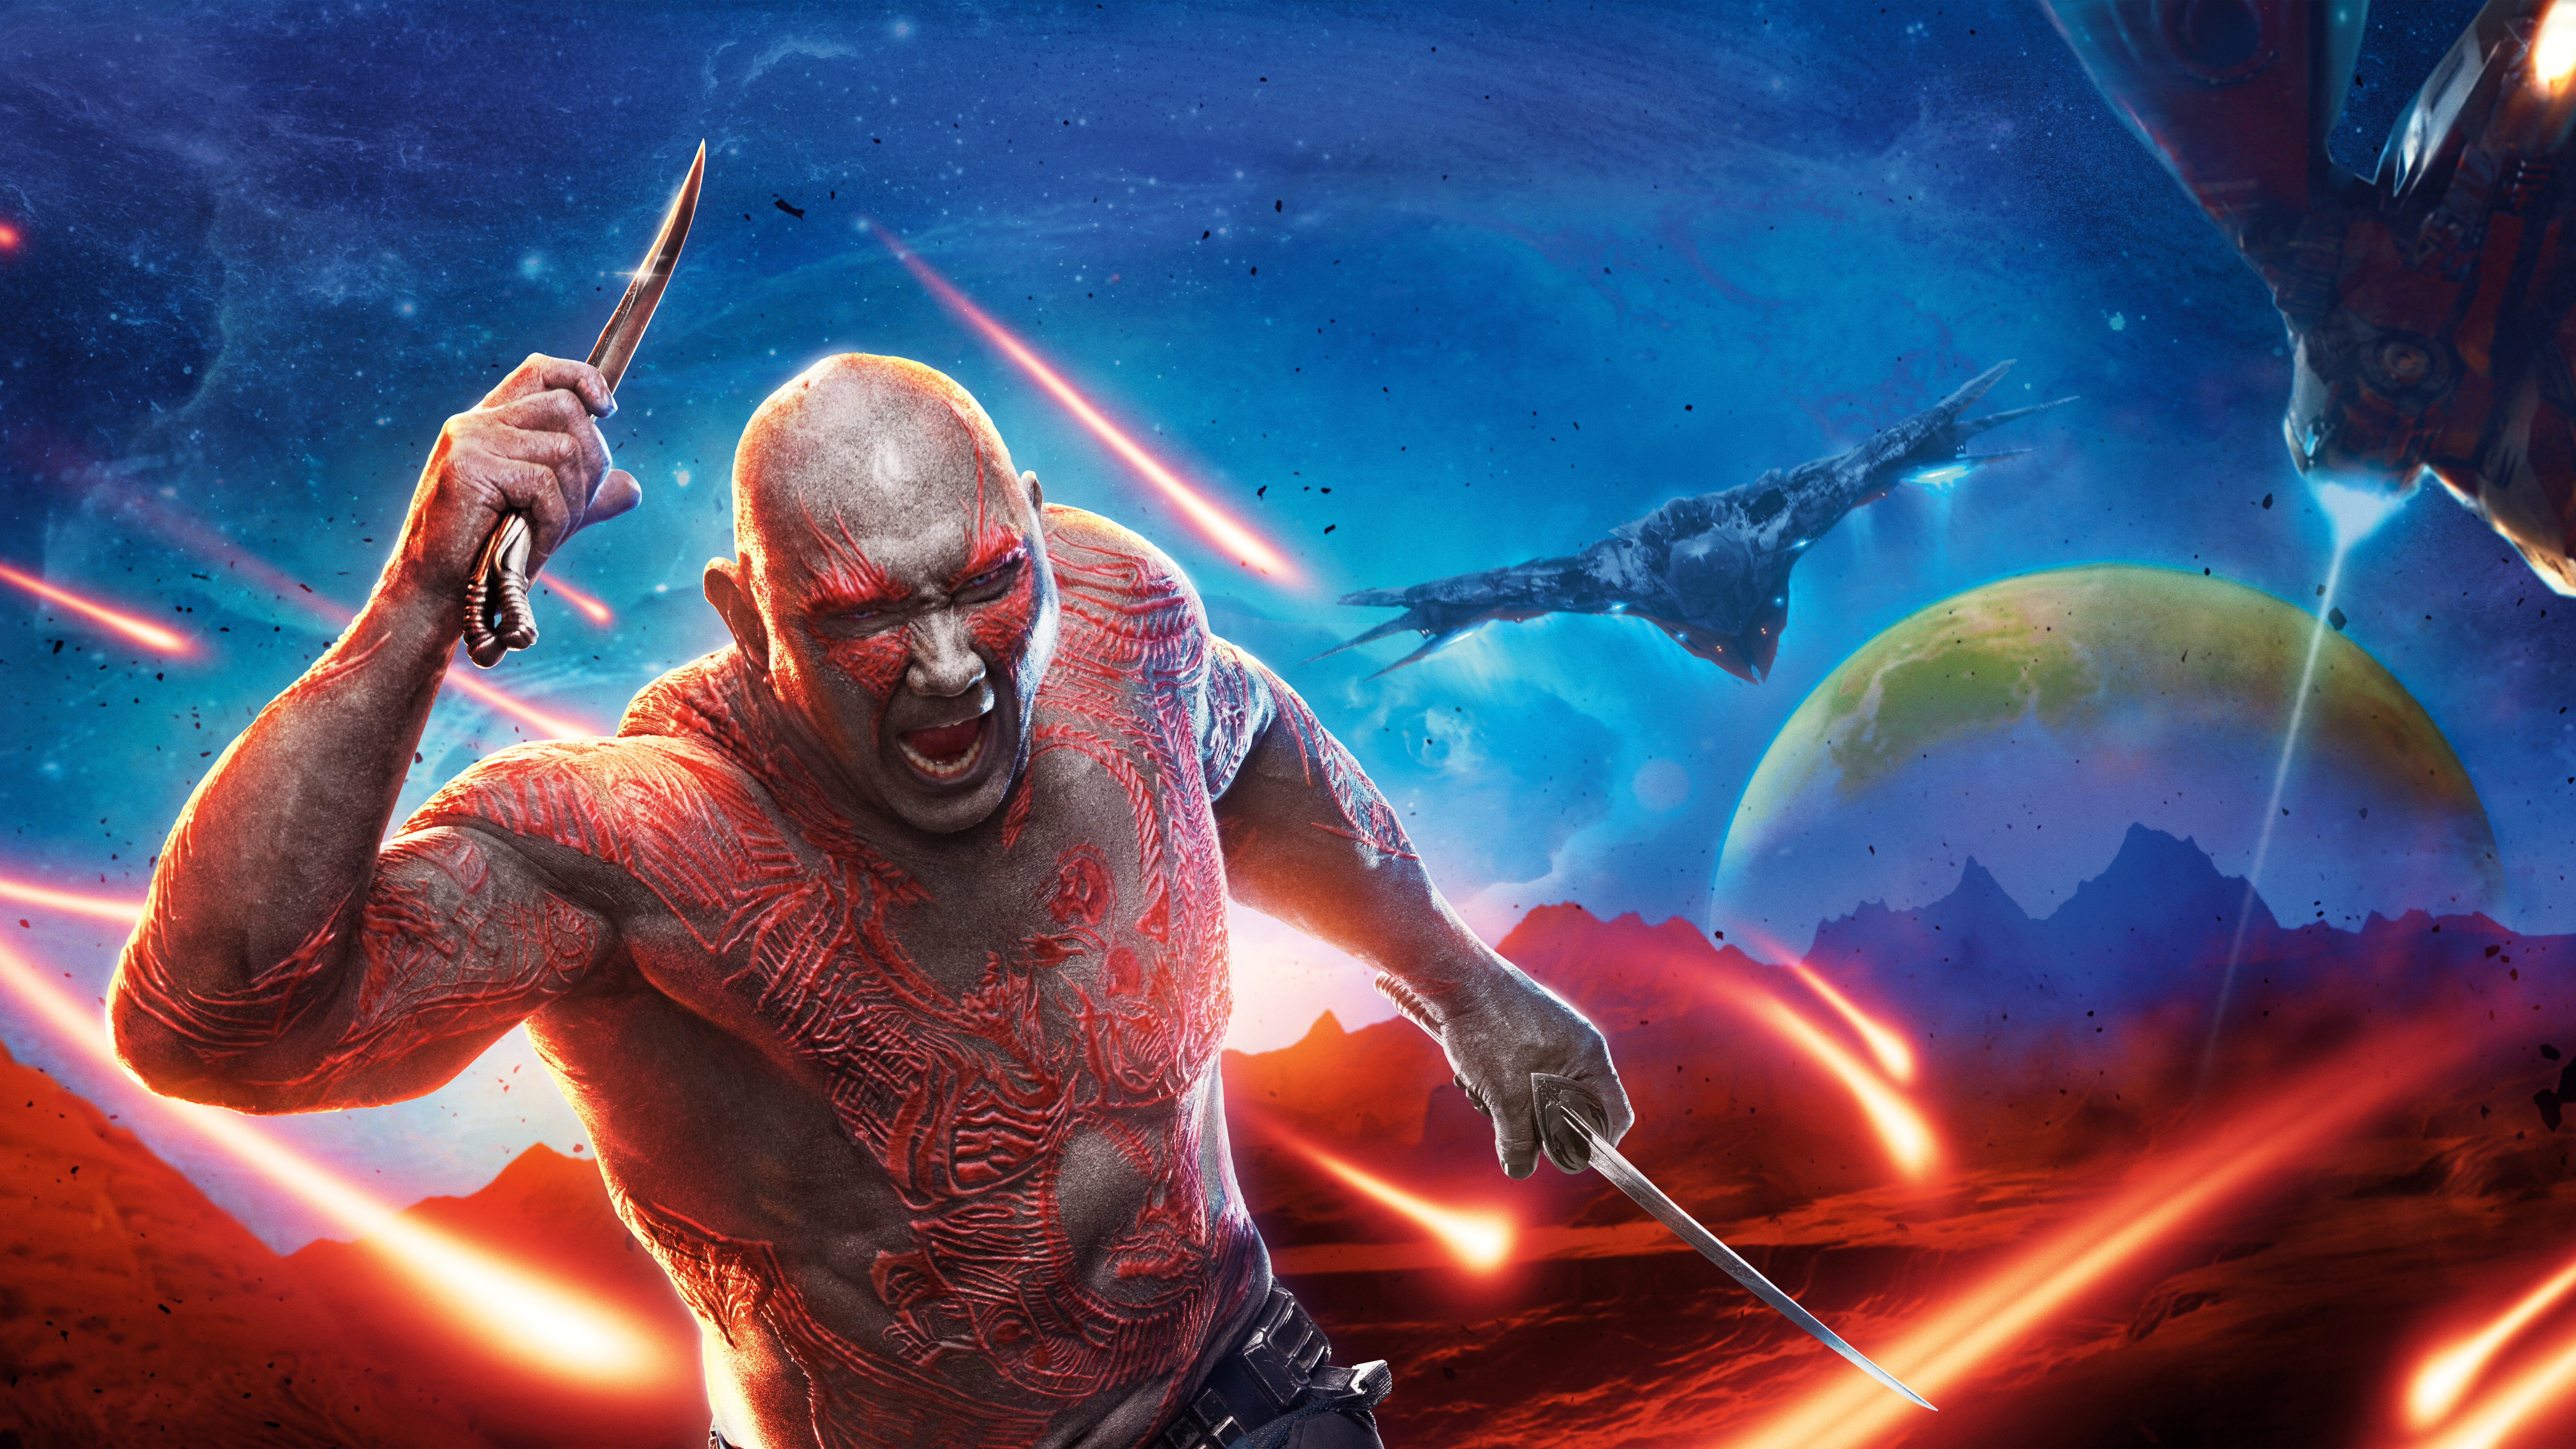 Drax the Destroyer, Dave Bautista, Guardians of the Galaxy Vol 2